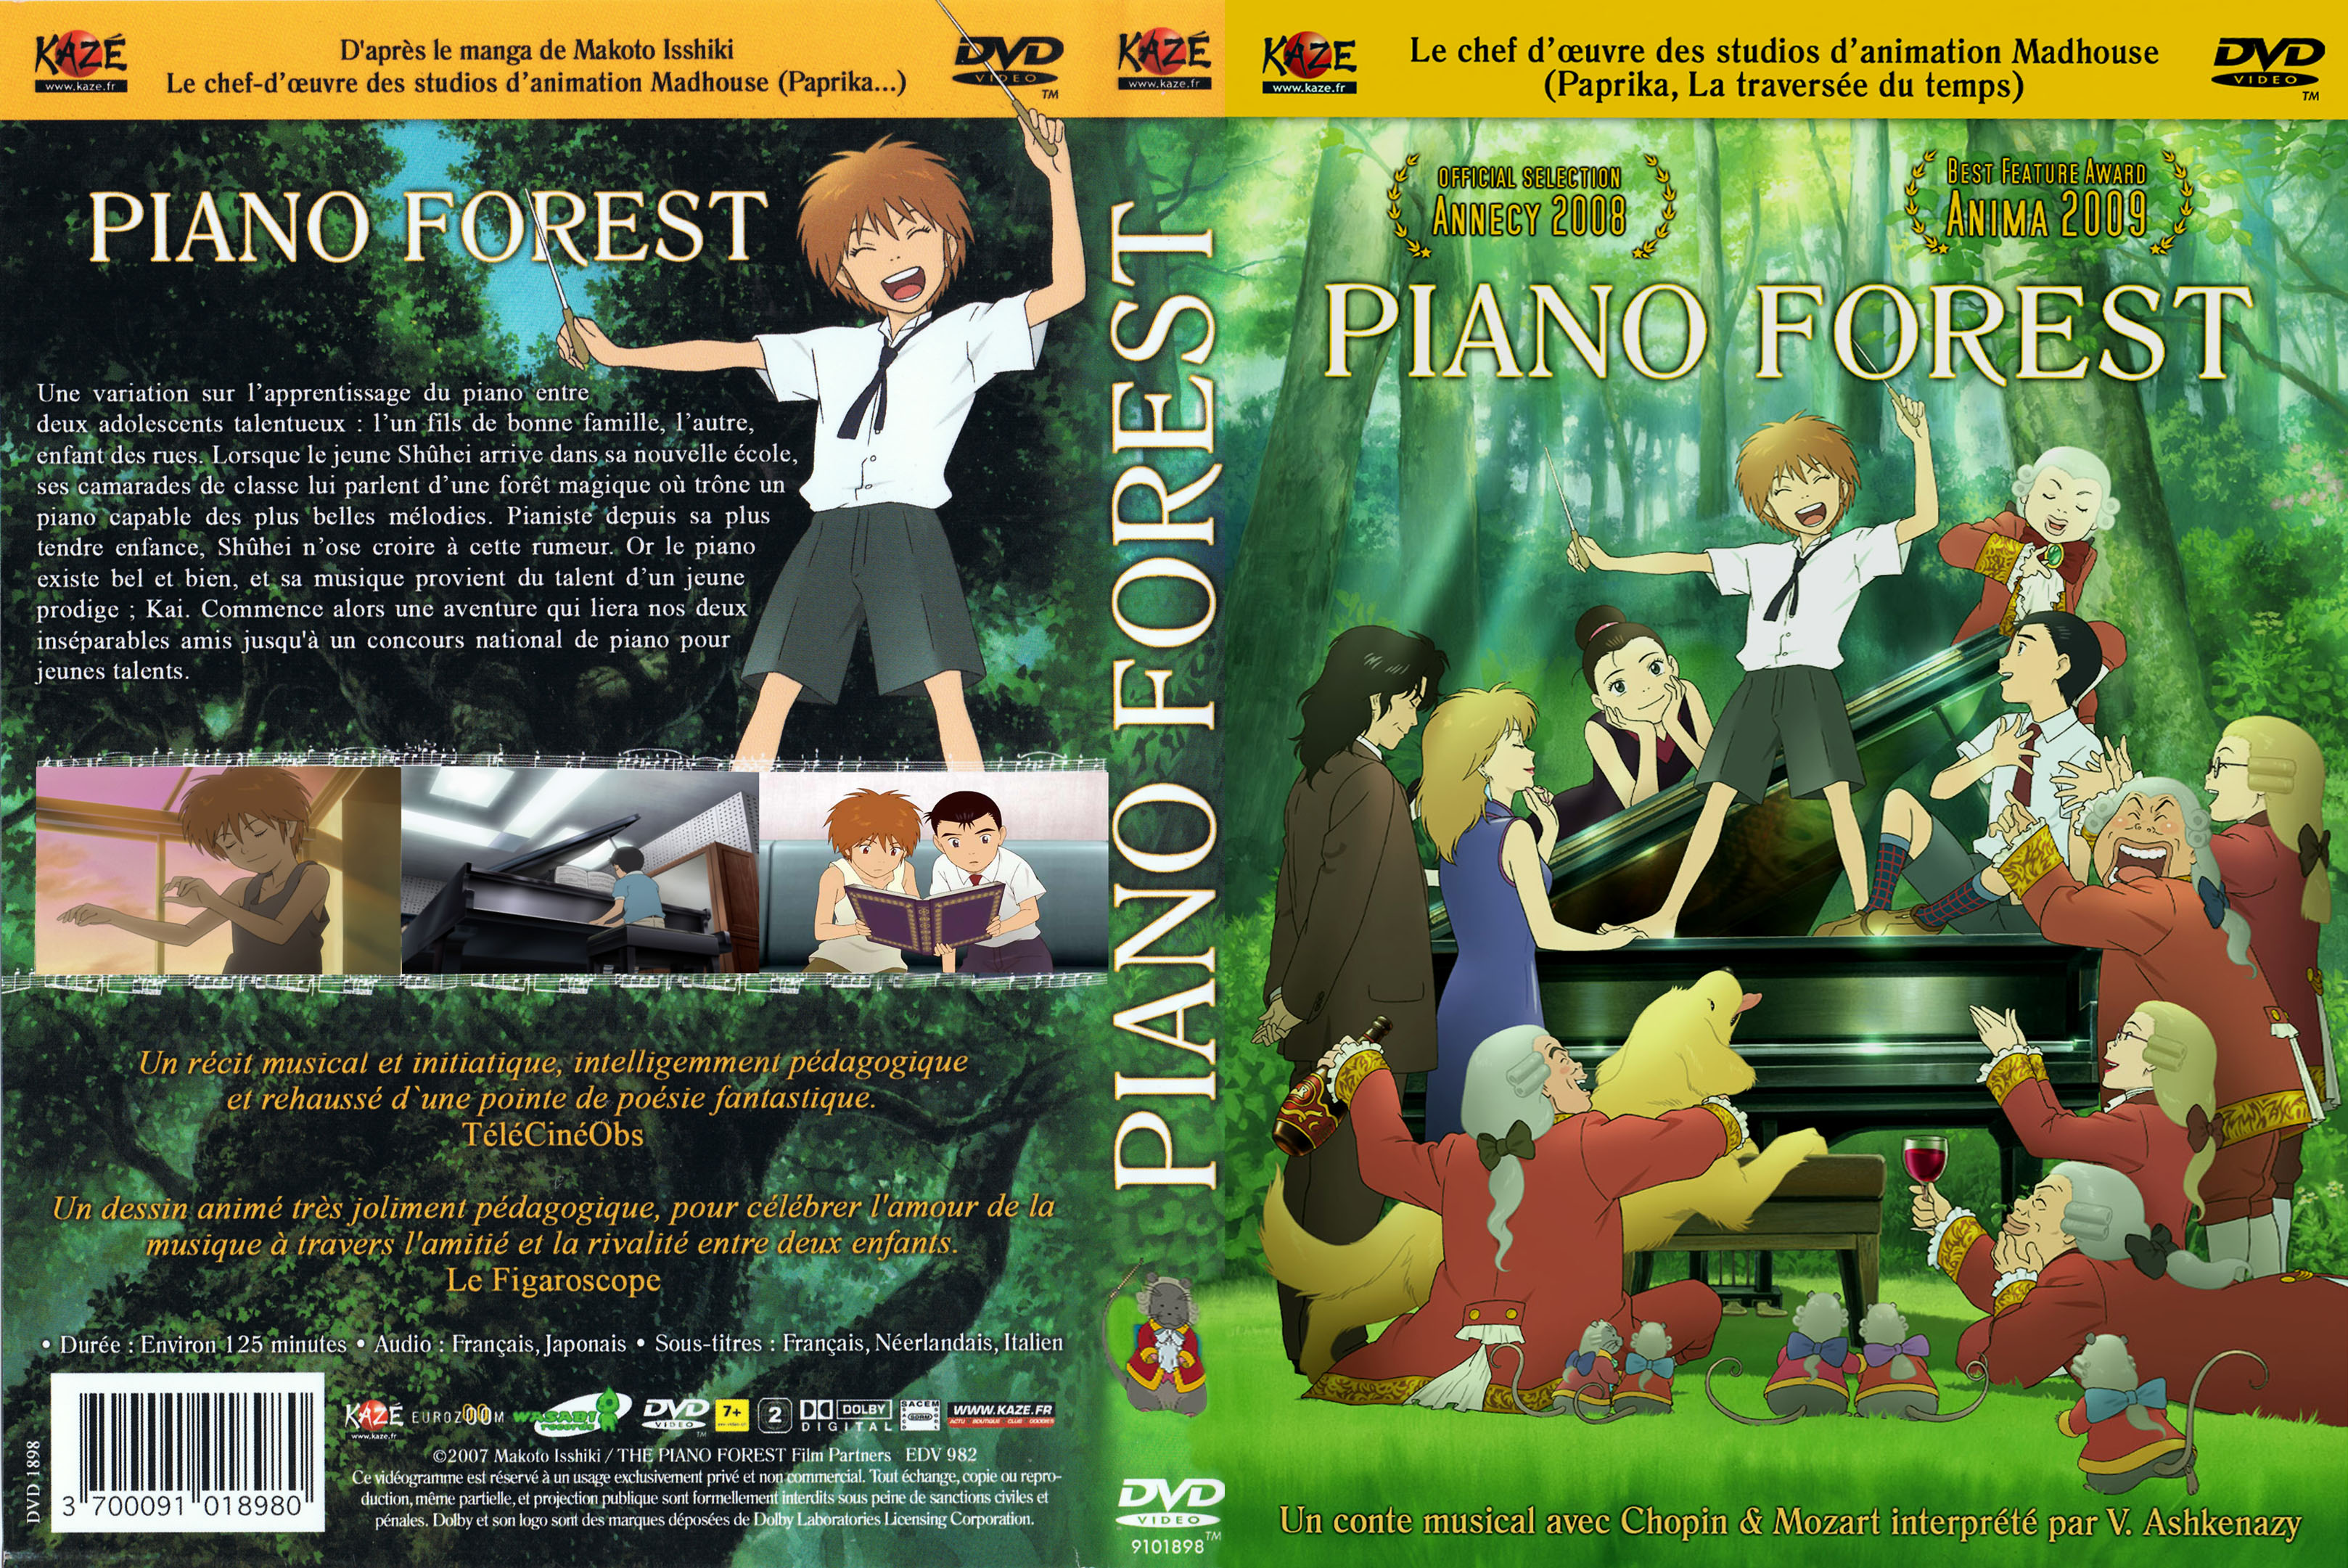 Jaquette DVD Piano forest